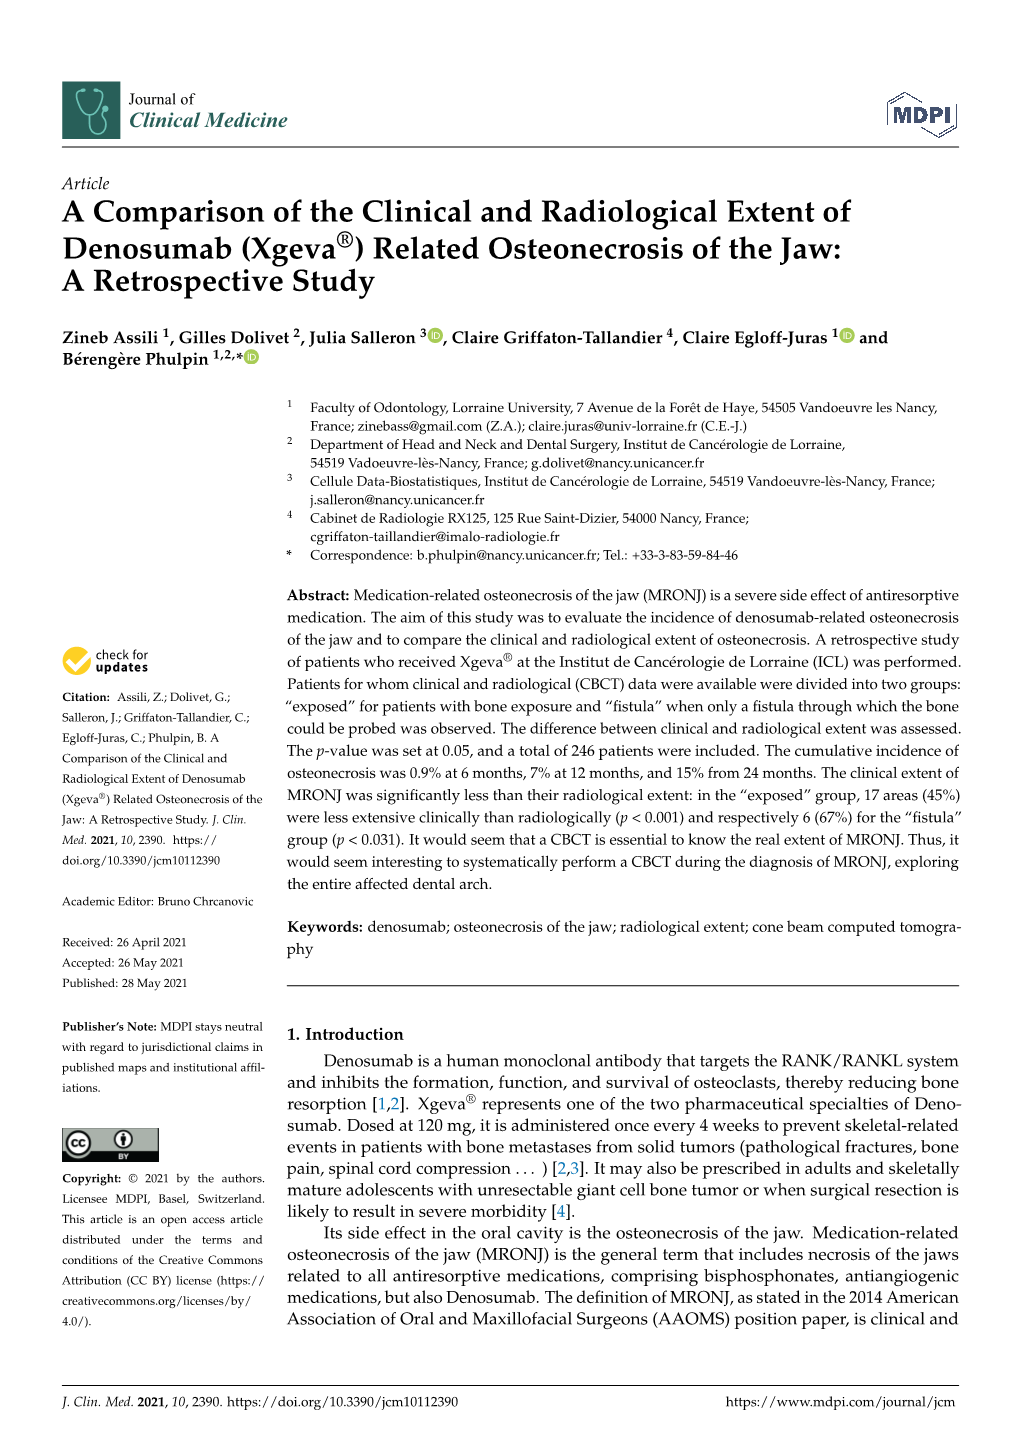 (Xgeva®) Related Osteonecrosis of the Jaw: a Retrospective Study